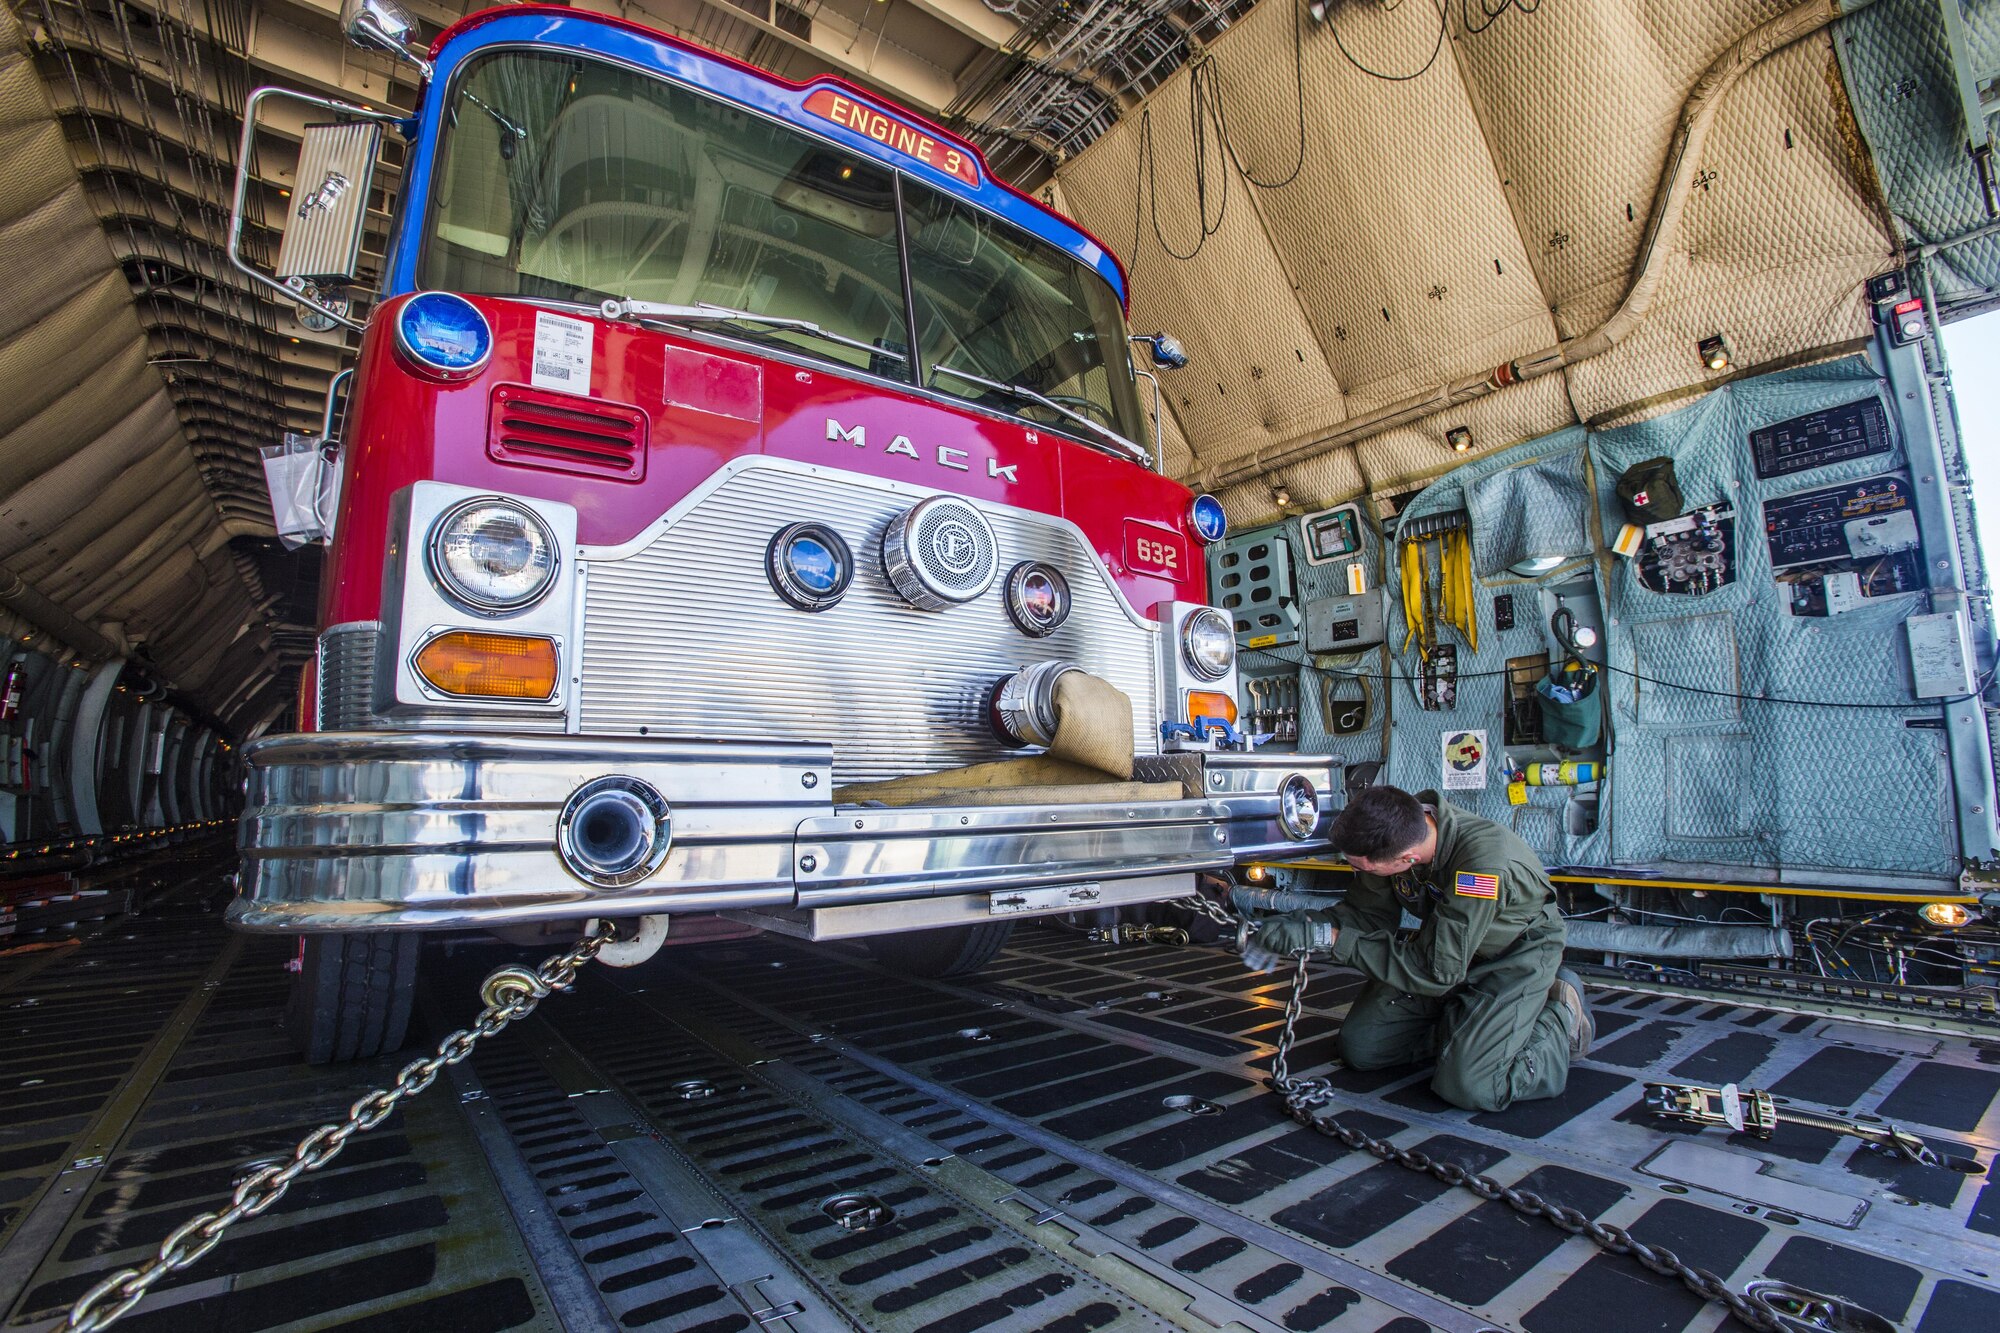 Loadmasters with the 439th Airlift Wing load a 1982 Mack fire truck onto a C-5B Galaxy at Joint Base McGuire-Dix-Lakehurst N.J., on Aug. 12, 2016. The truck will be flown to Managua, Nicaragua. Master Sgt. Jorge A. Narvaez, a New Jersey Air National Guardsman with the 108th Security Forces Squadron, was instrumental in getting the truck donated to a group of volunteer firefighters in Managua. The 439th AW is located at Westover Air Reserve Base, Mass.